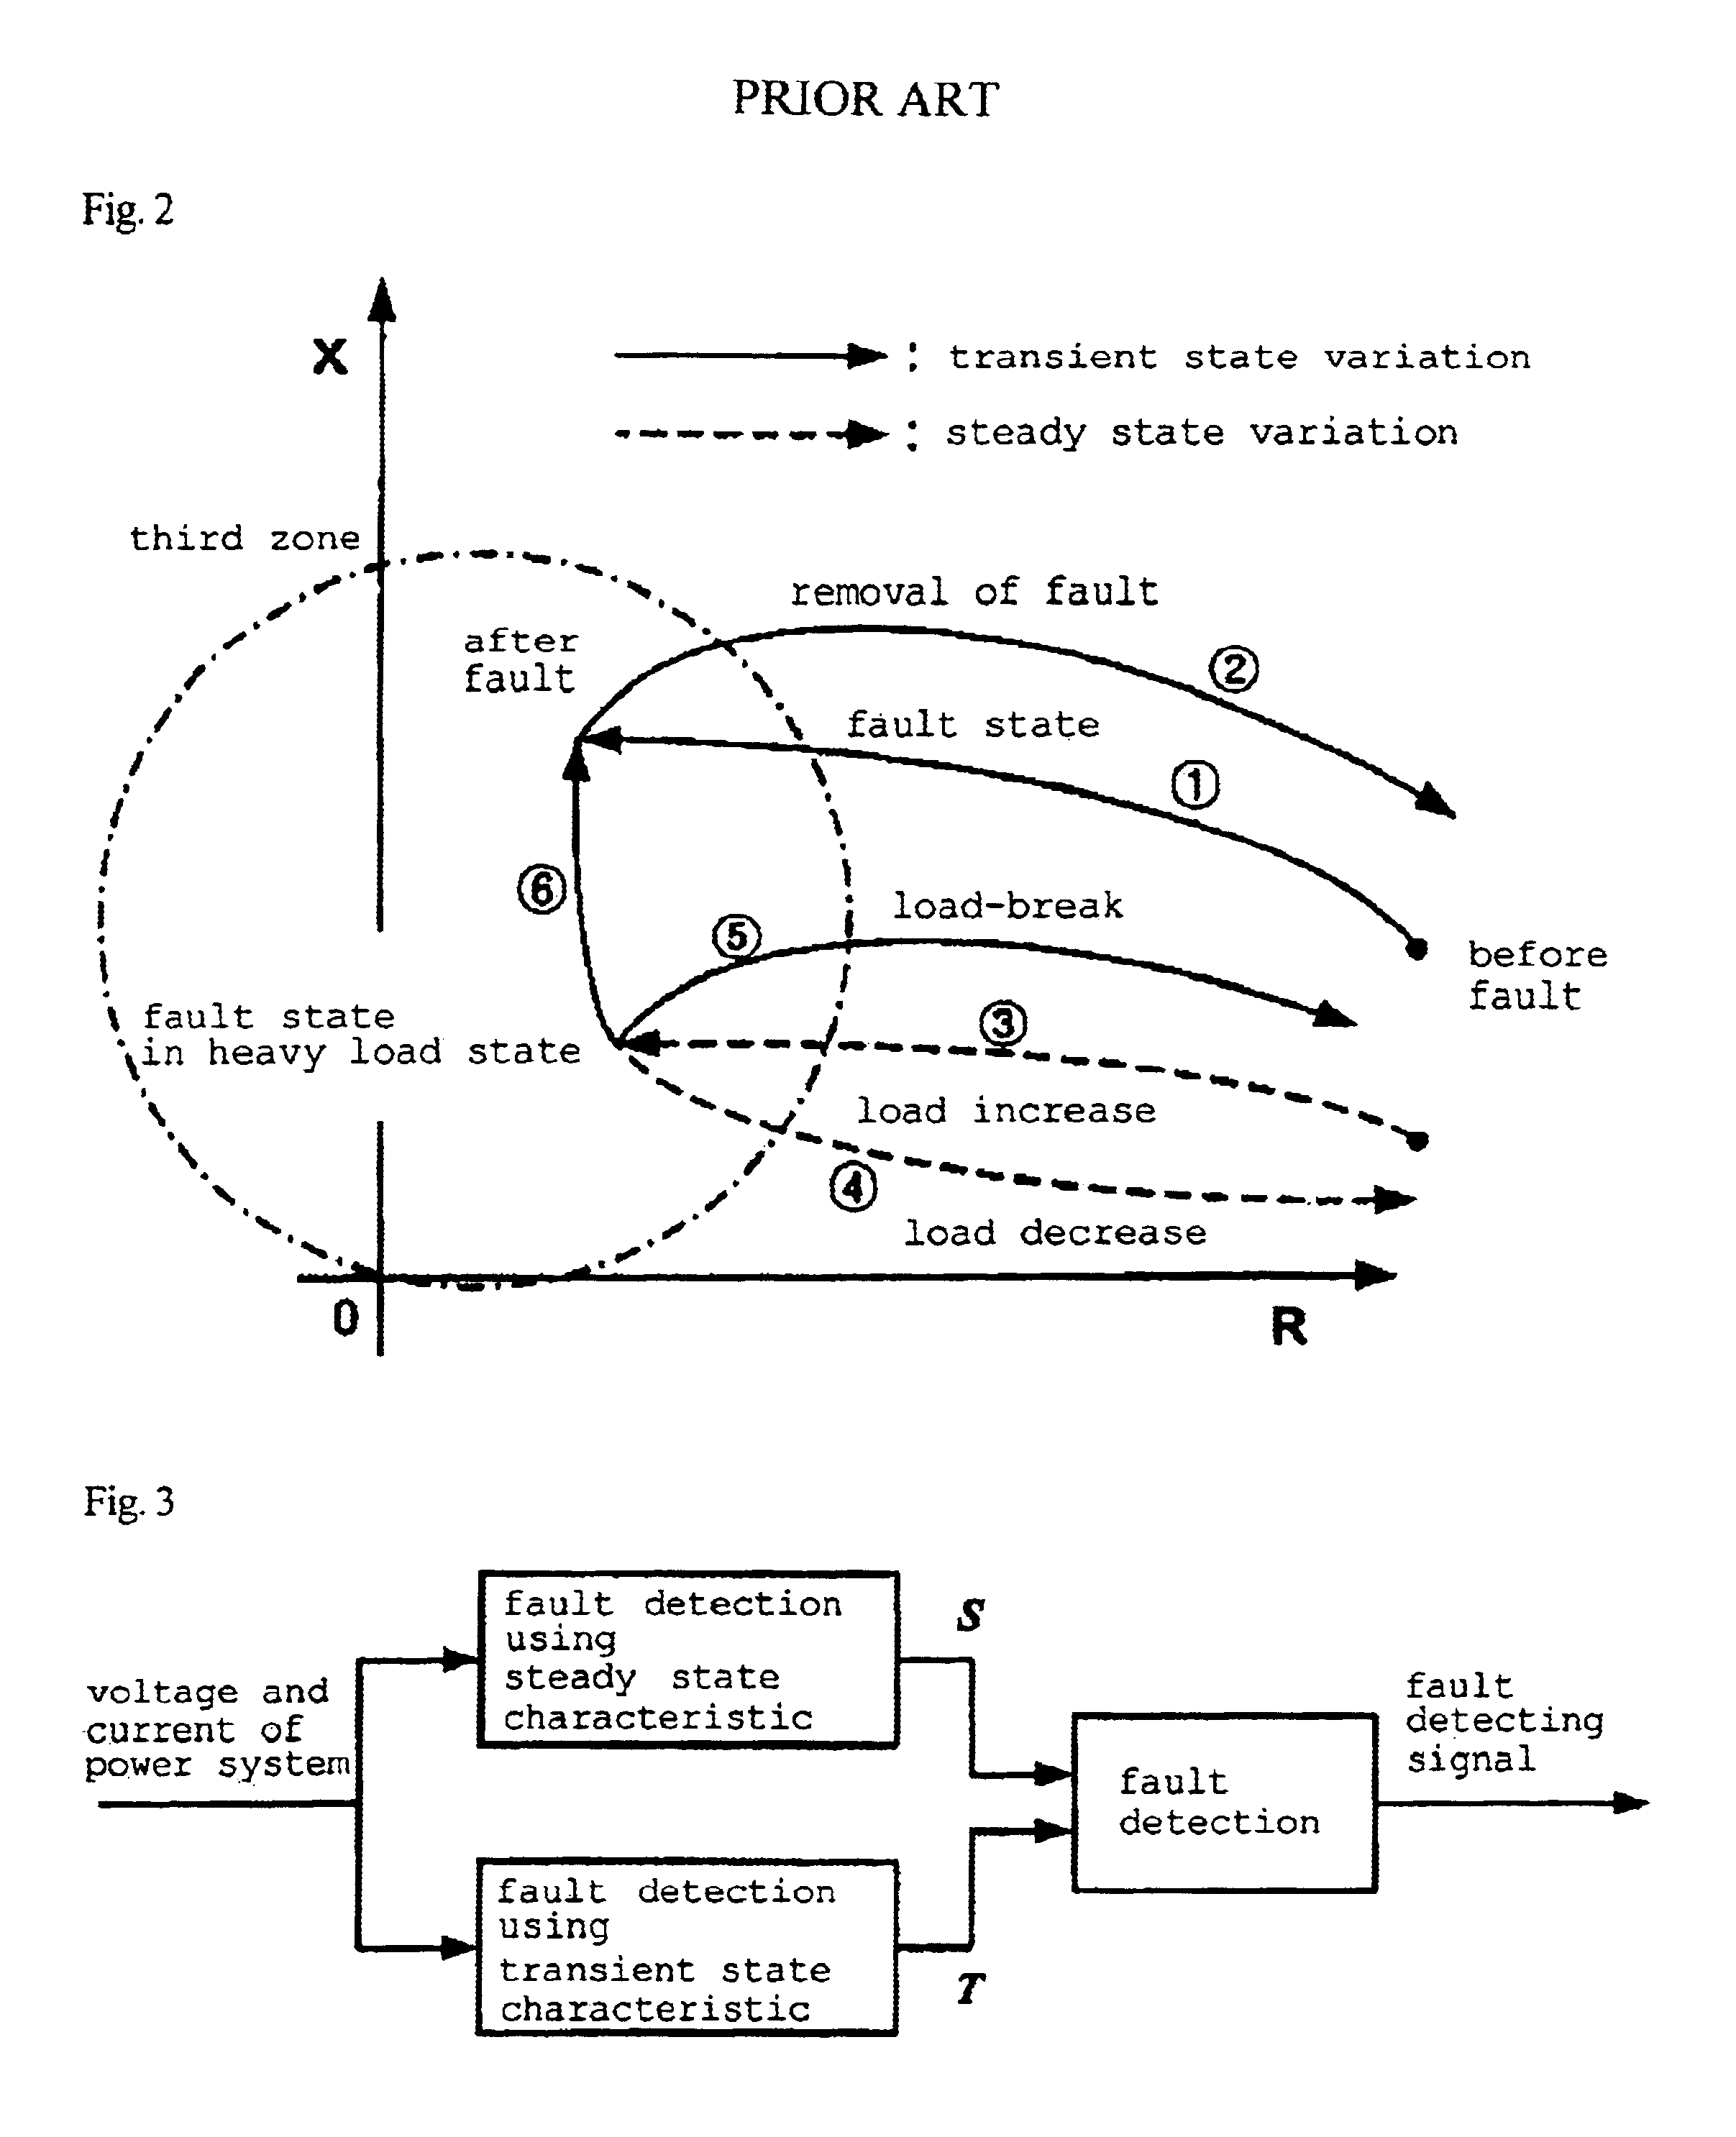 Method for detecting fault on transmission lines by using harmonics and state transition diagram